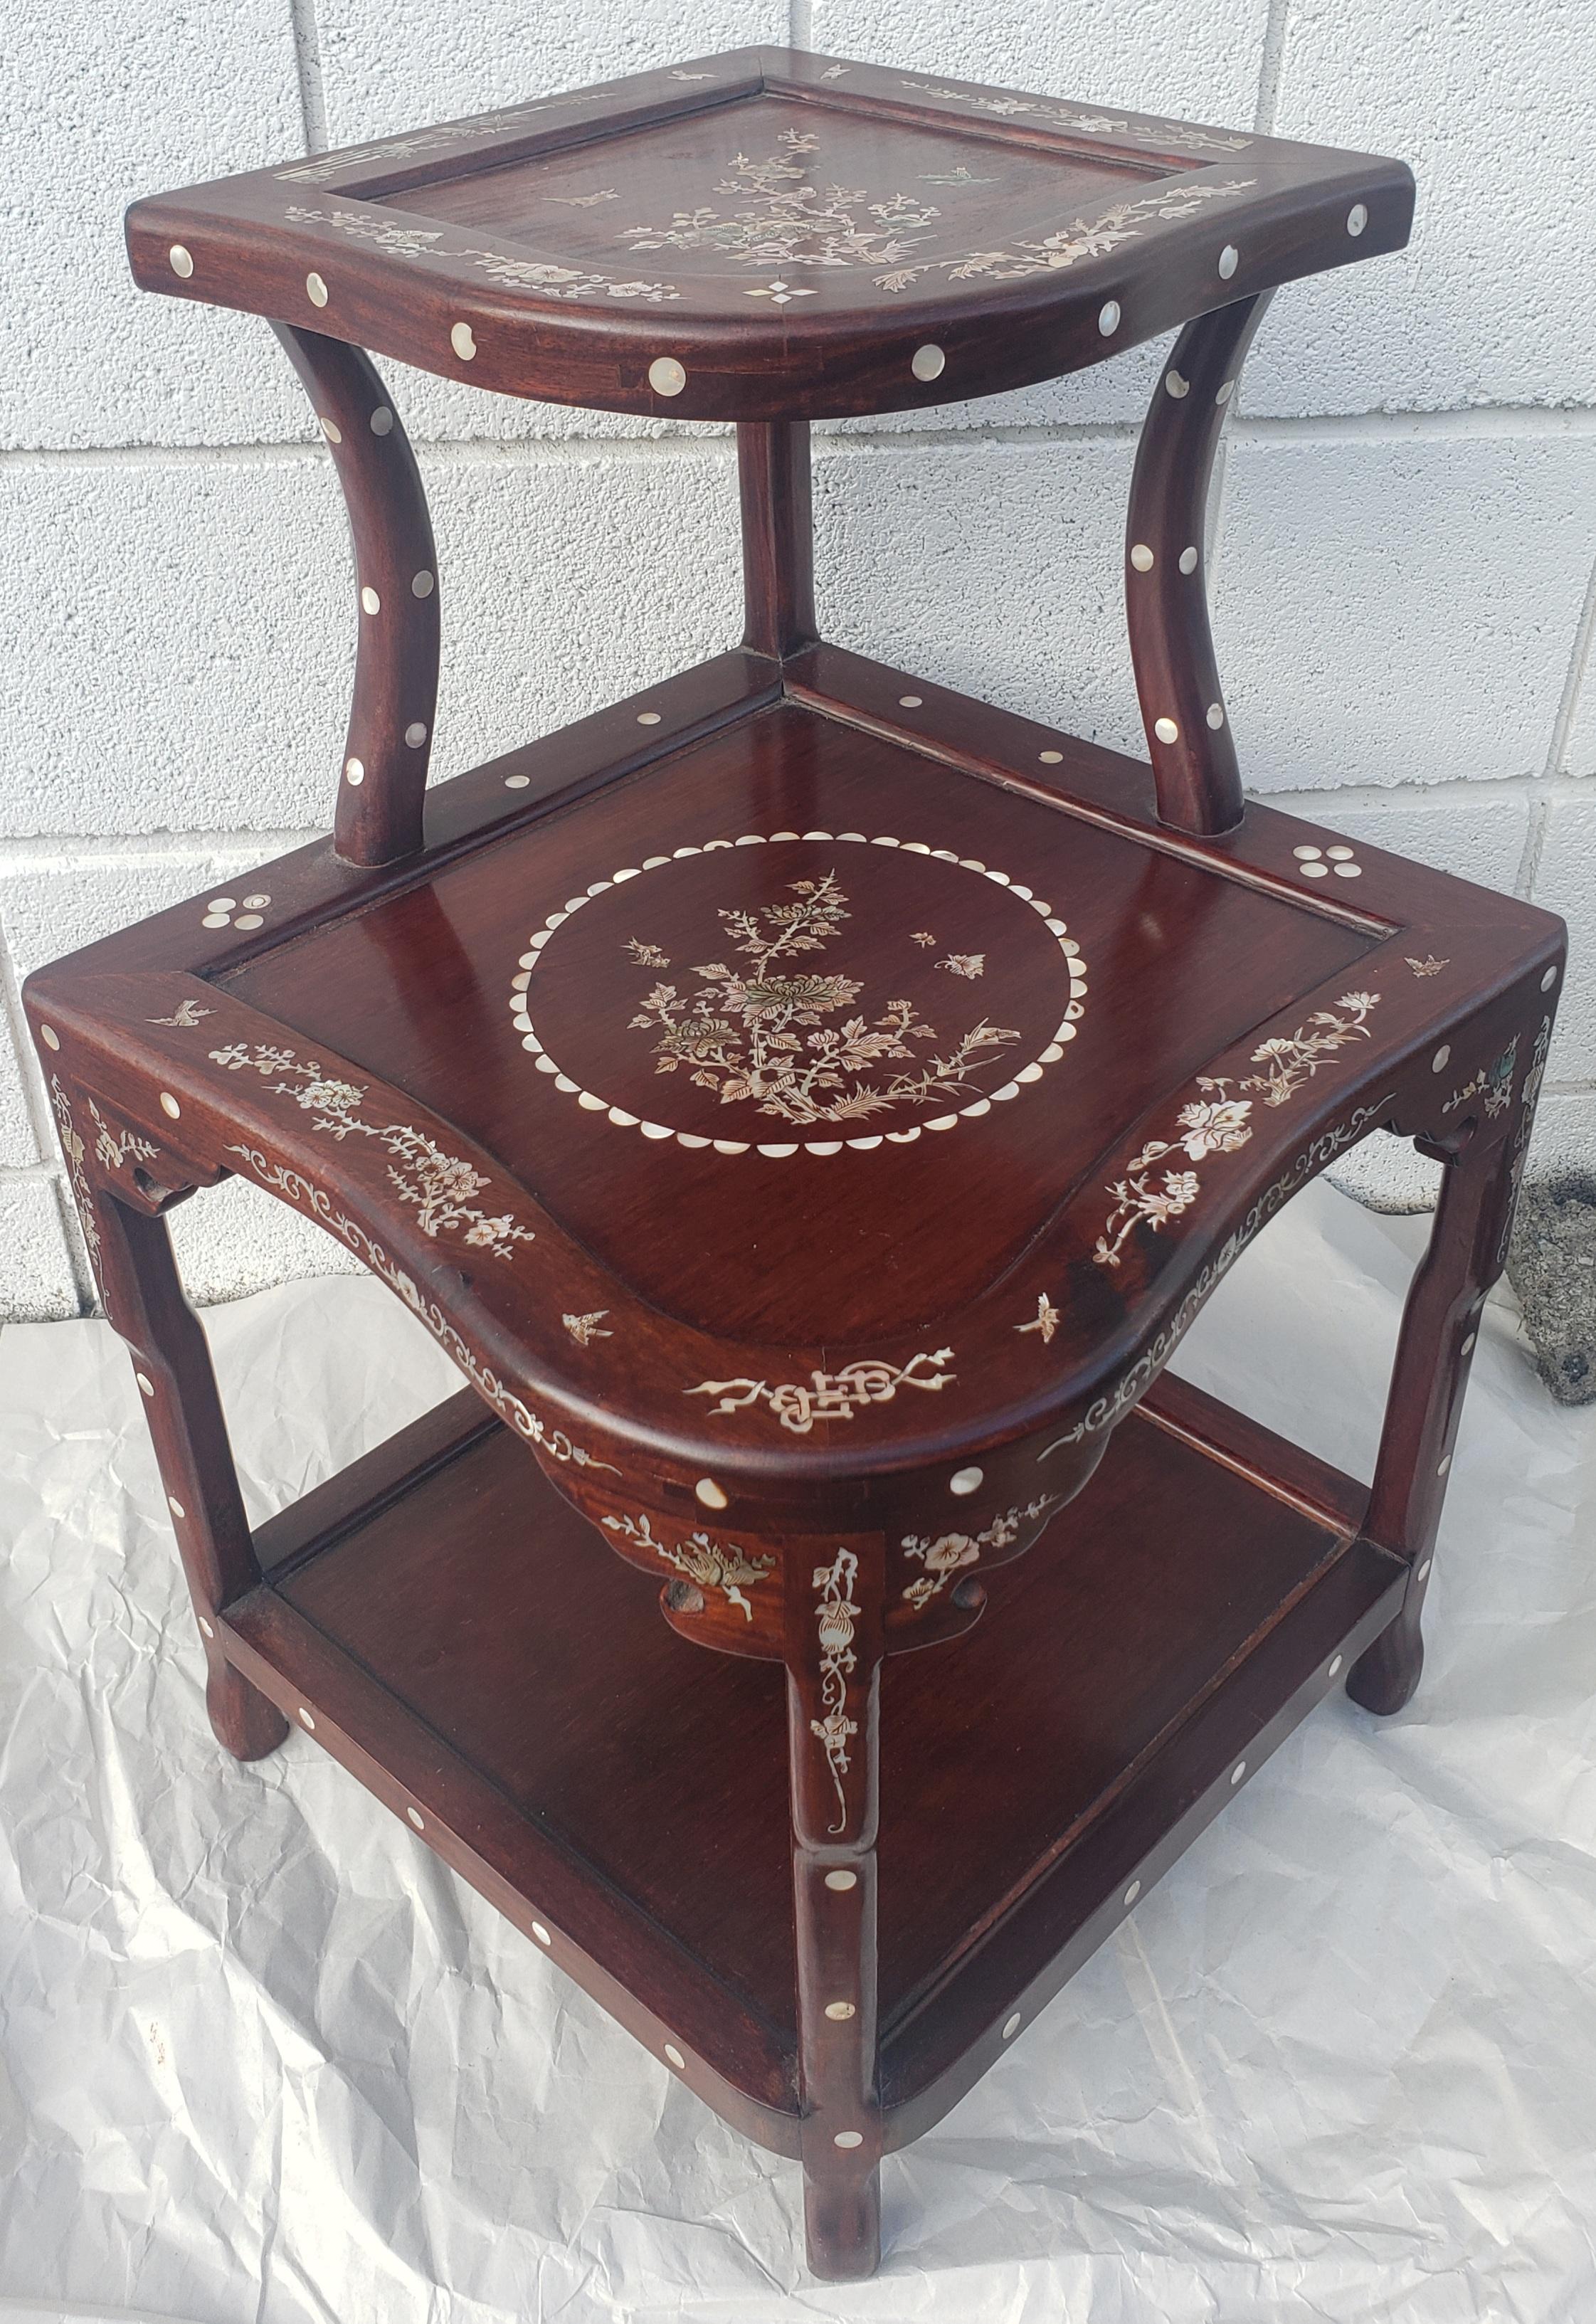 A Chinese Mother-of-Pearl Inlaid Rosewood three-tier Corner Table in great vintage condition. Measures 22.5